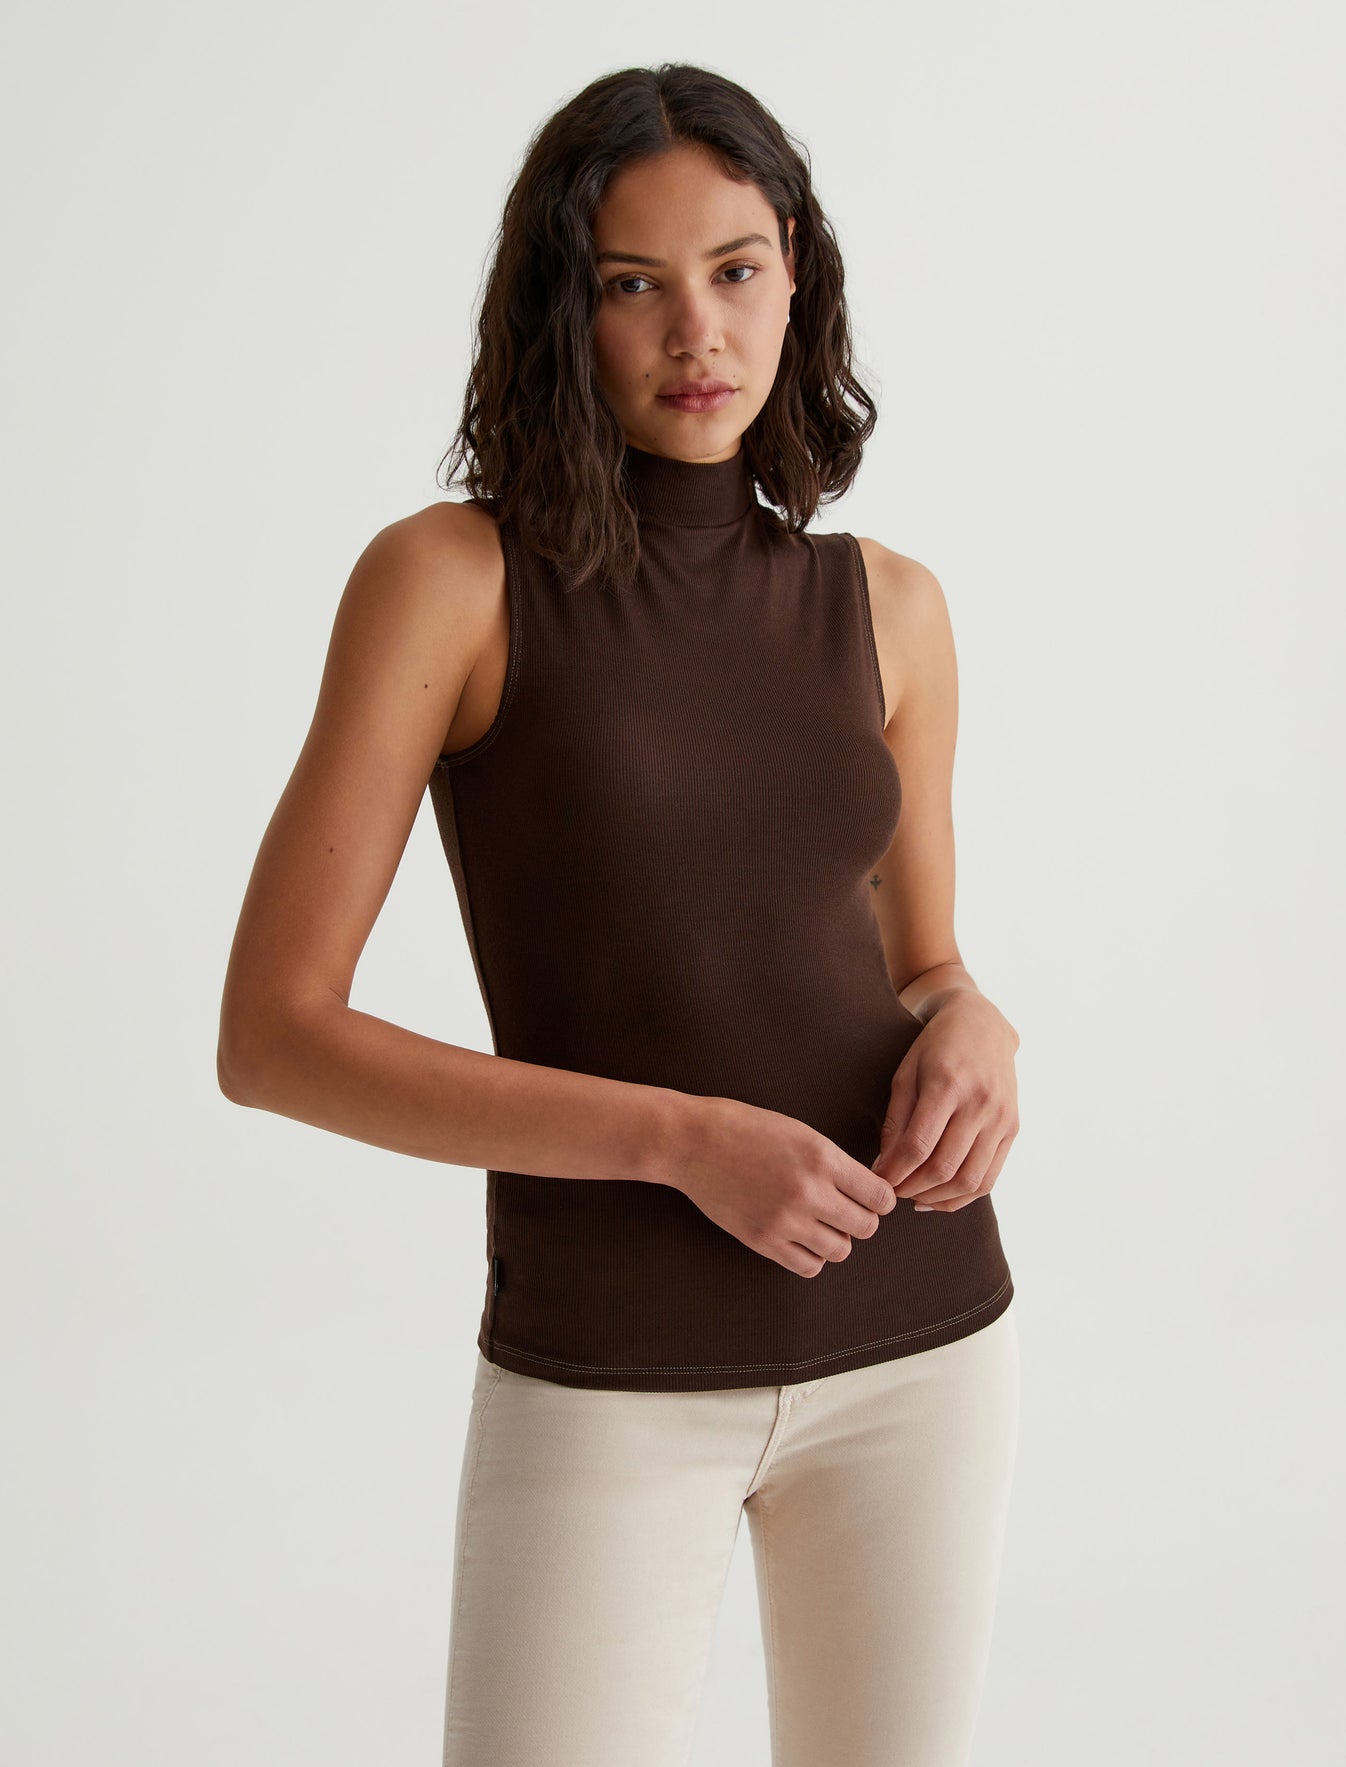 Chocolate Jeans at AG Sleeveless Bitter Store Edie Womens Official Turtleneck